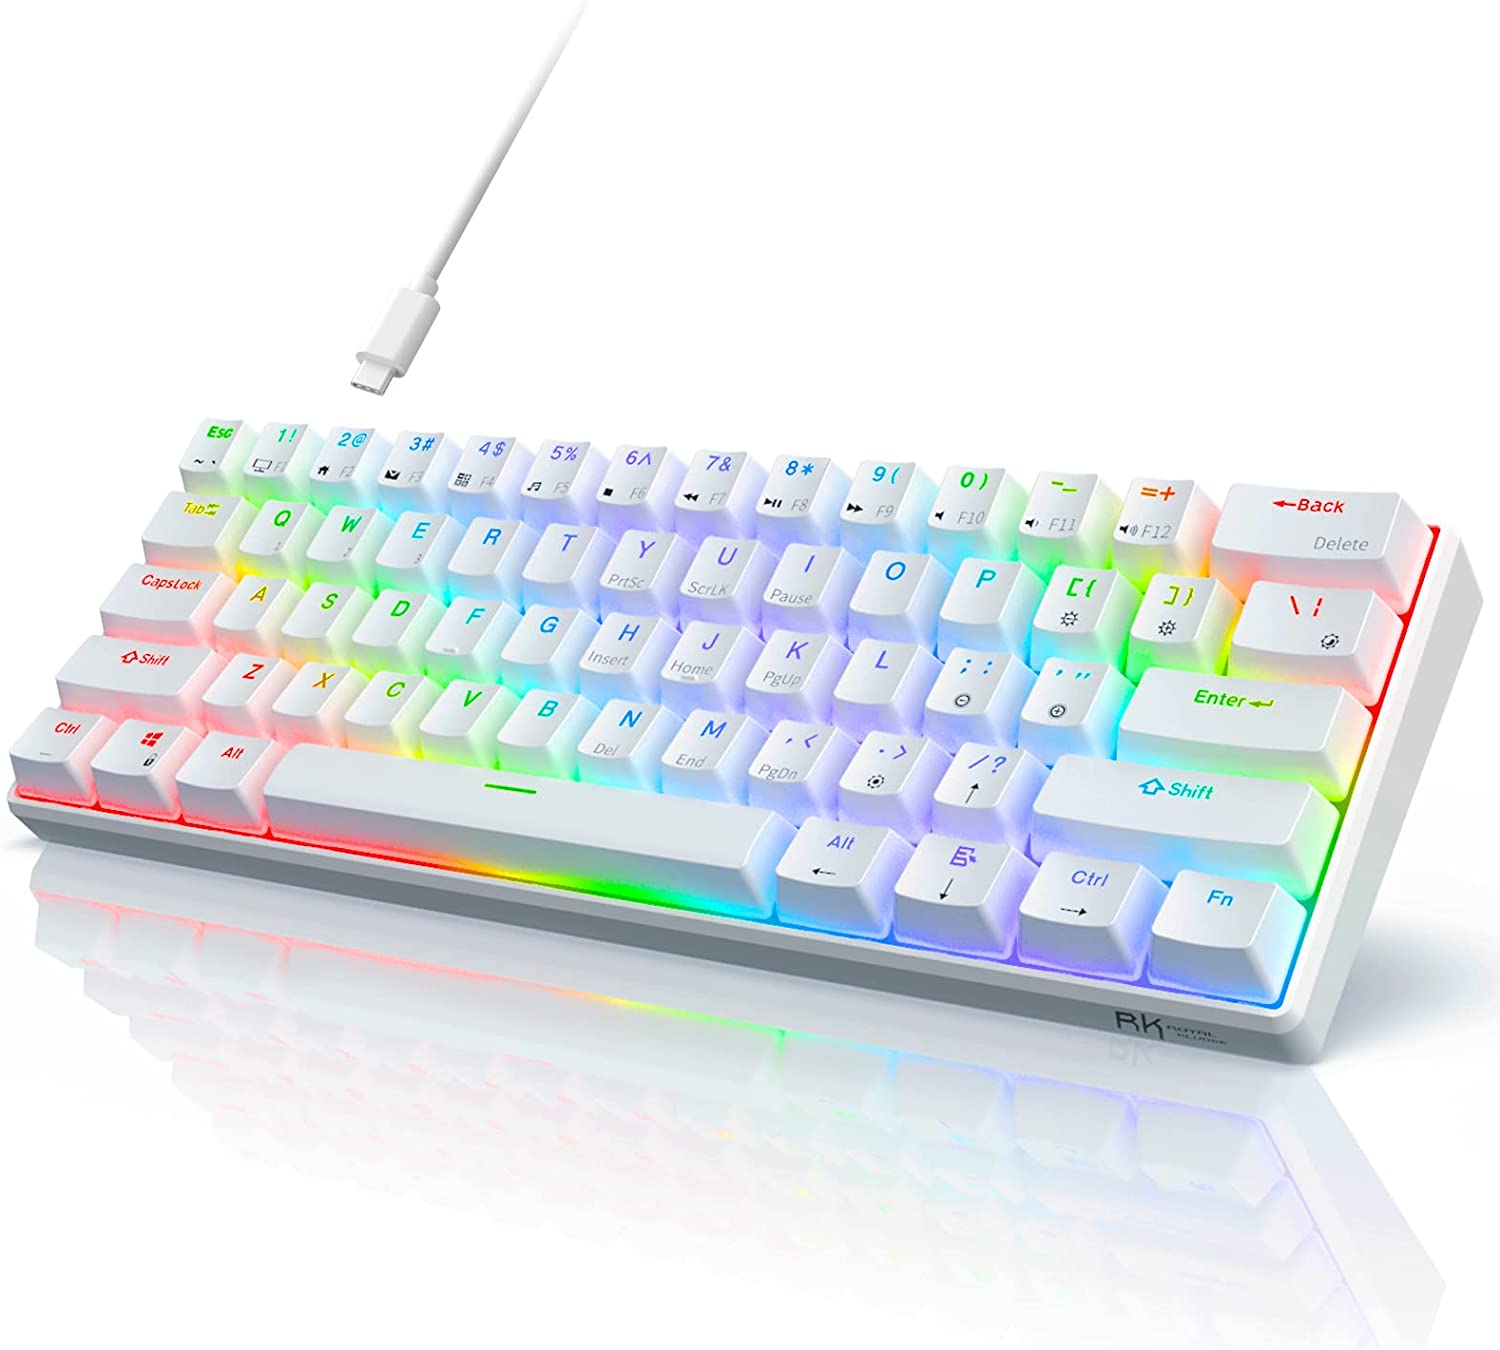 RK ROYAL KLUDGE RK61 Wired 60% Mechanical Gaming Keyboard RGB Backlit Ultra-Compact Hot-Swappable Red Switch White